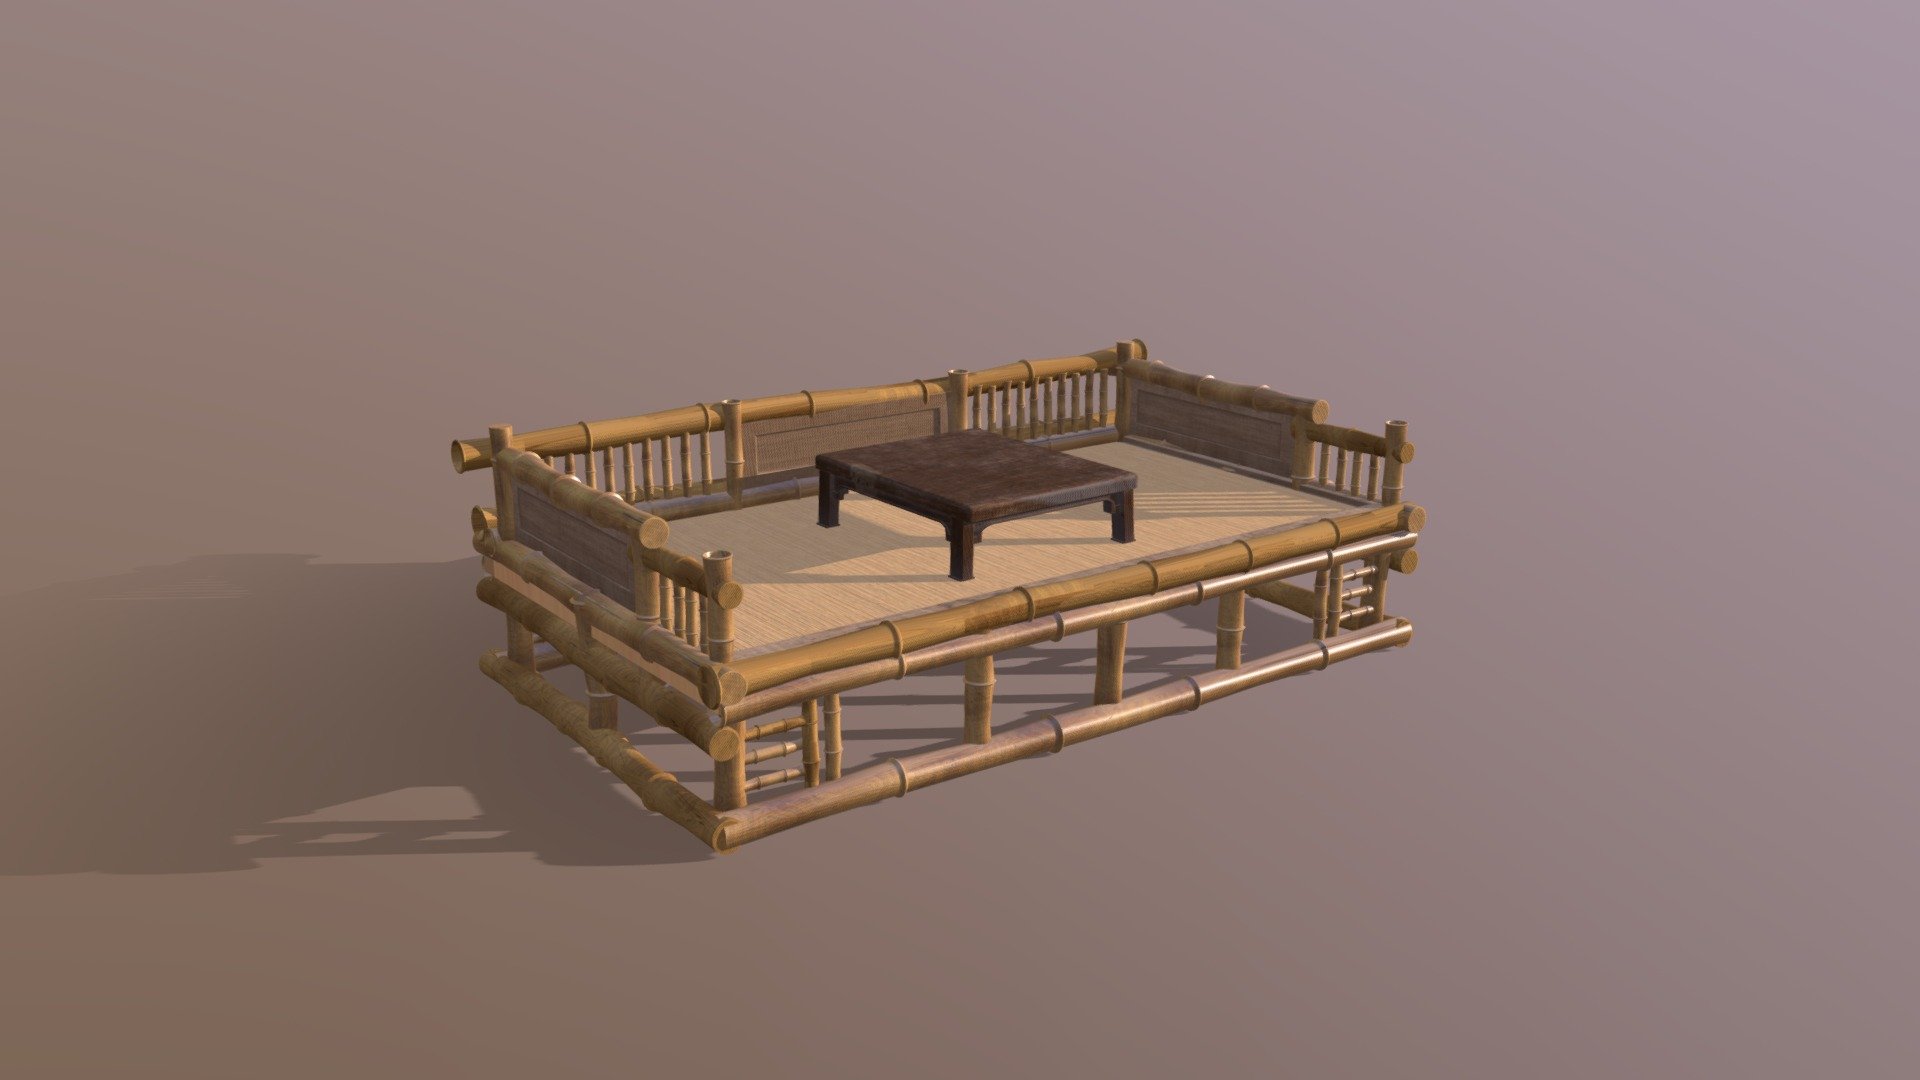 A chinese style bamboo bed that I designed - bamboo bed - 竹榻 - 3D model by wang2dog 3d model